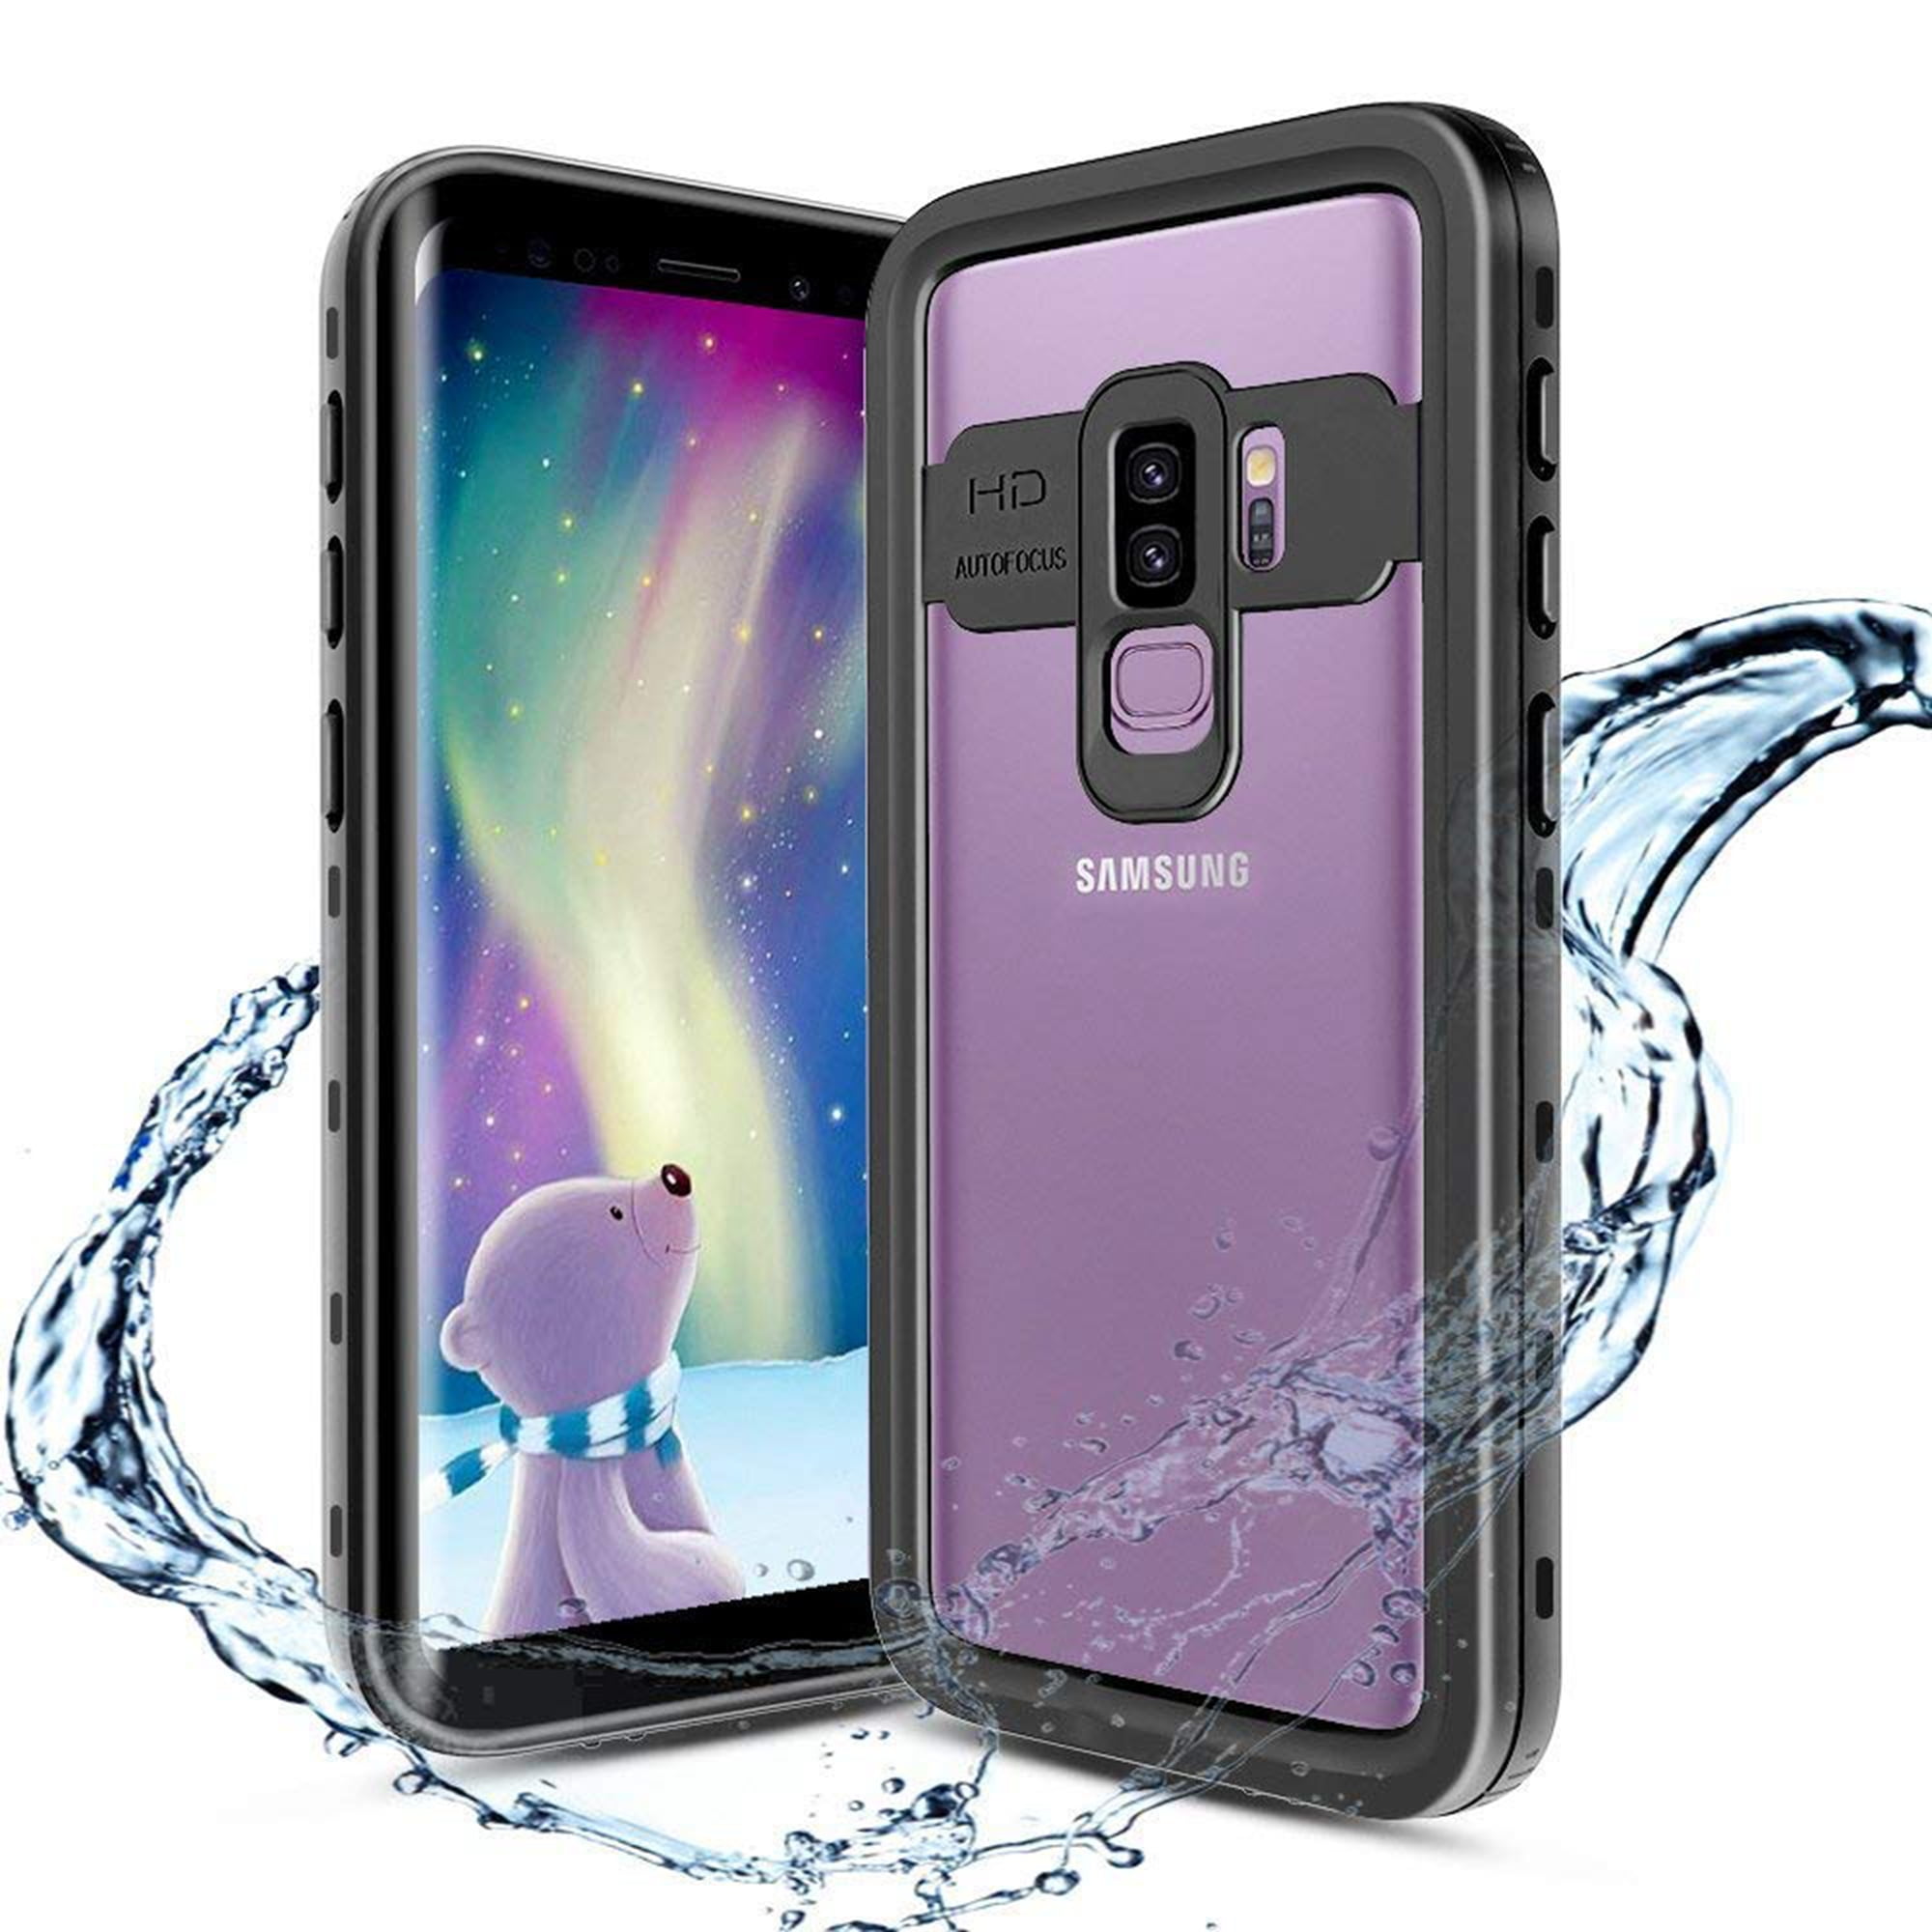 Leather Case for Samsung Galaxy S9 Plus Flip Cover fit for Samsung Galaxy S9 Plus Business Gifts with Waterproof-case Bags 